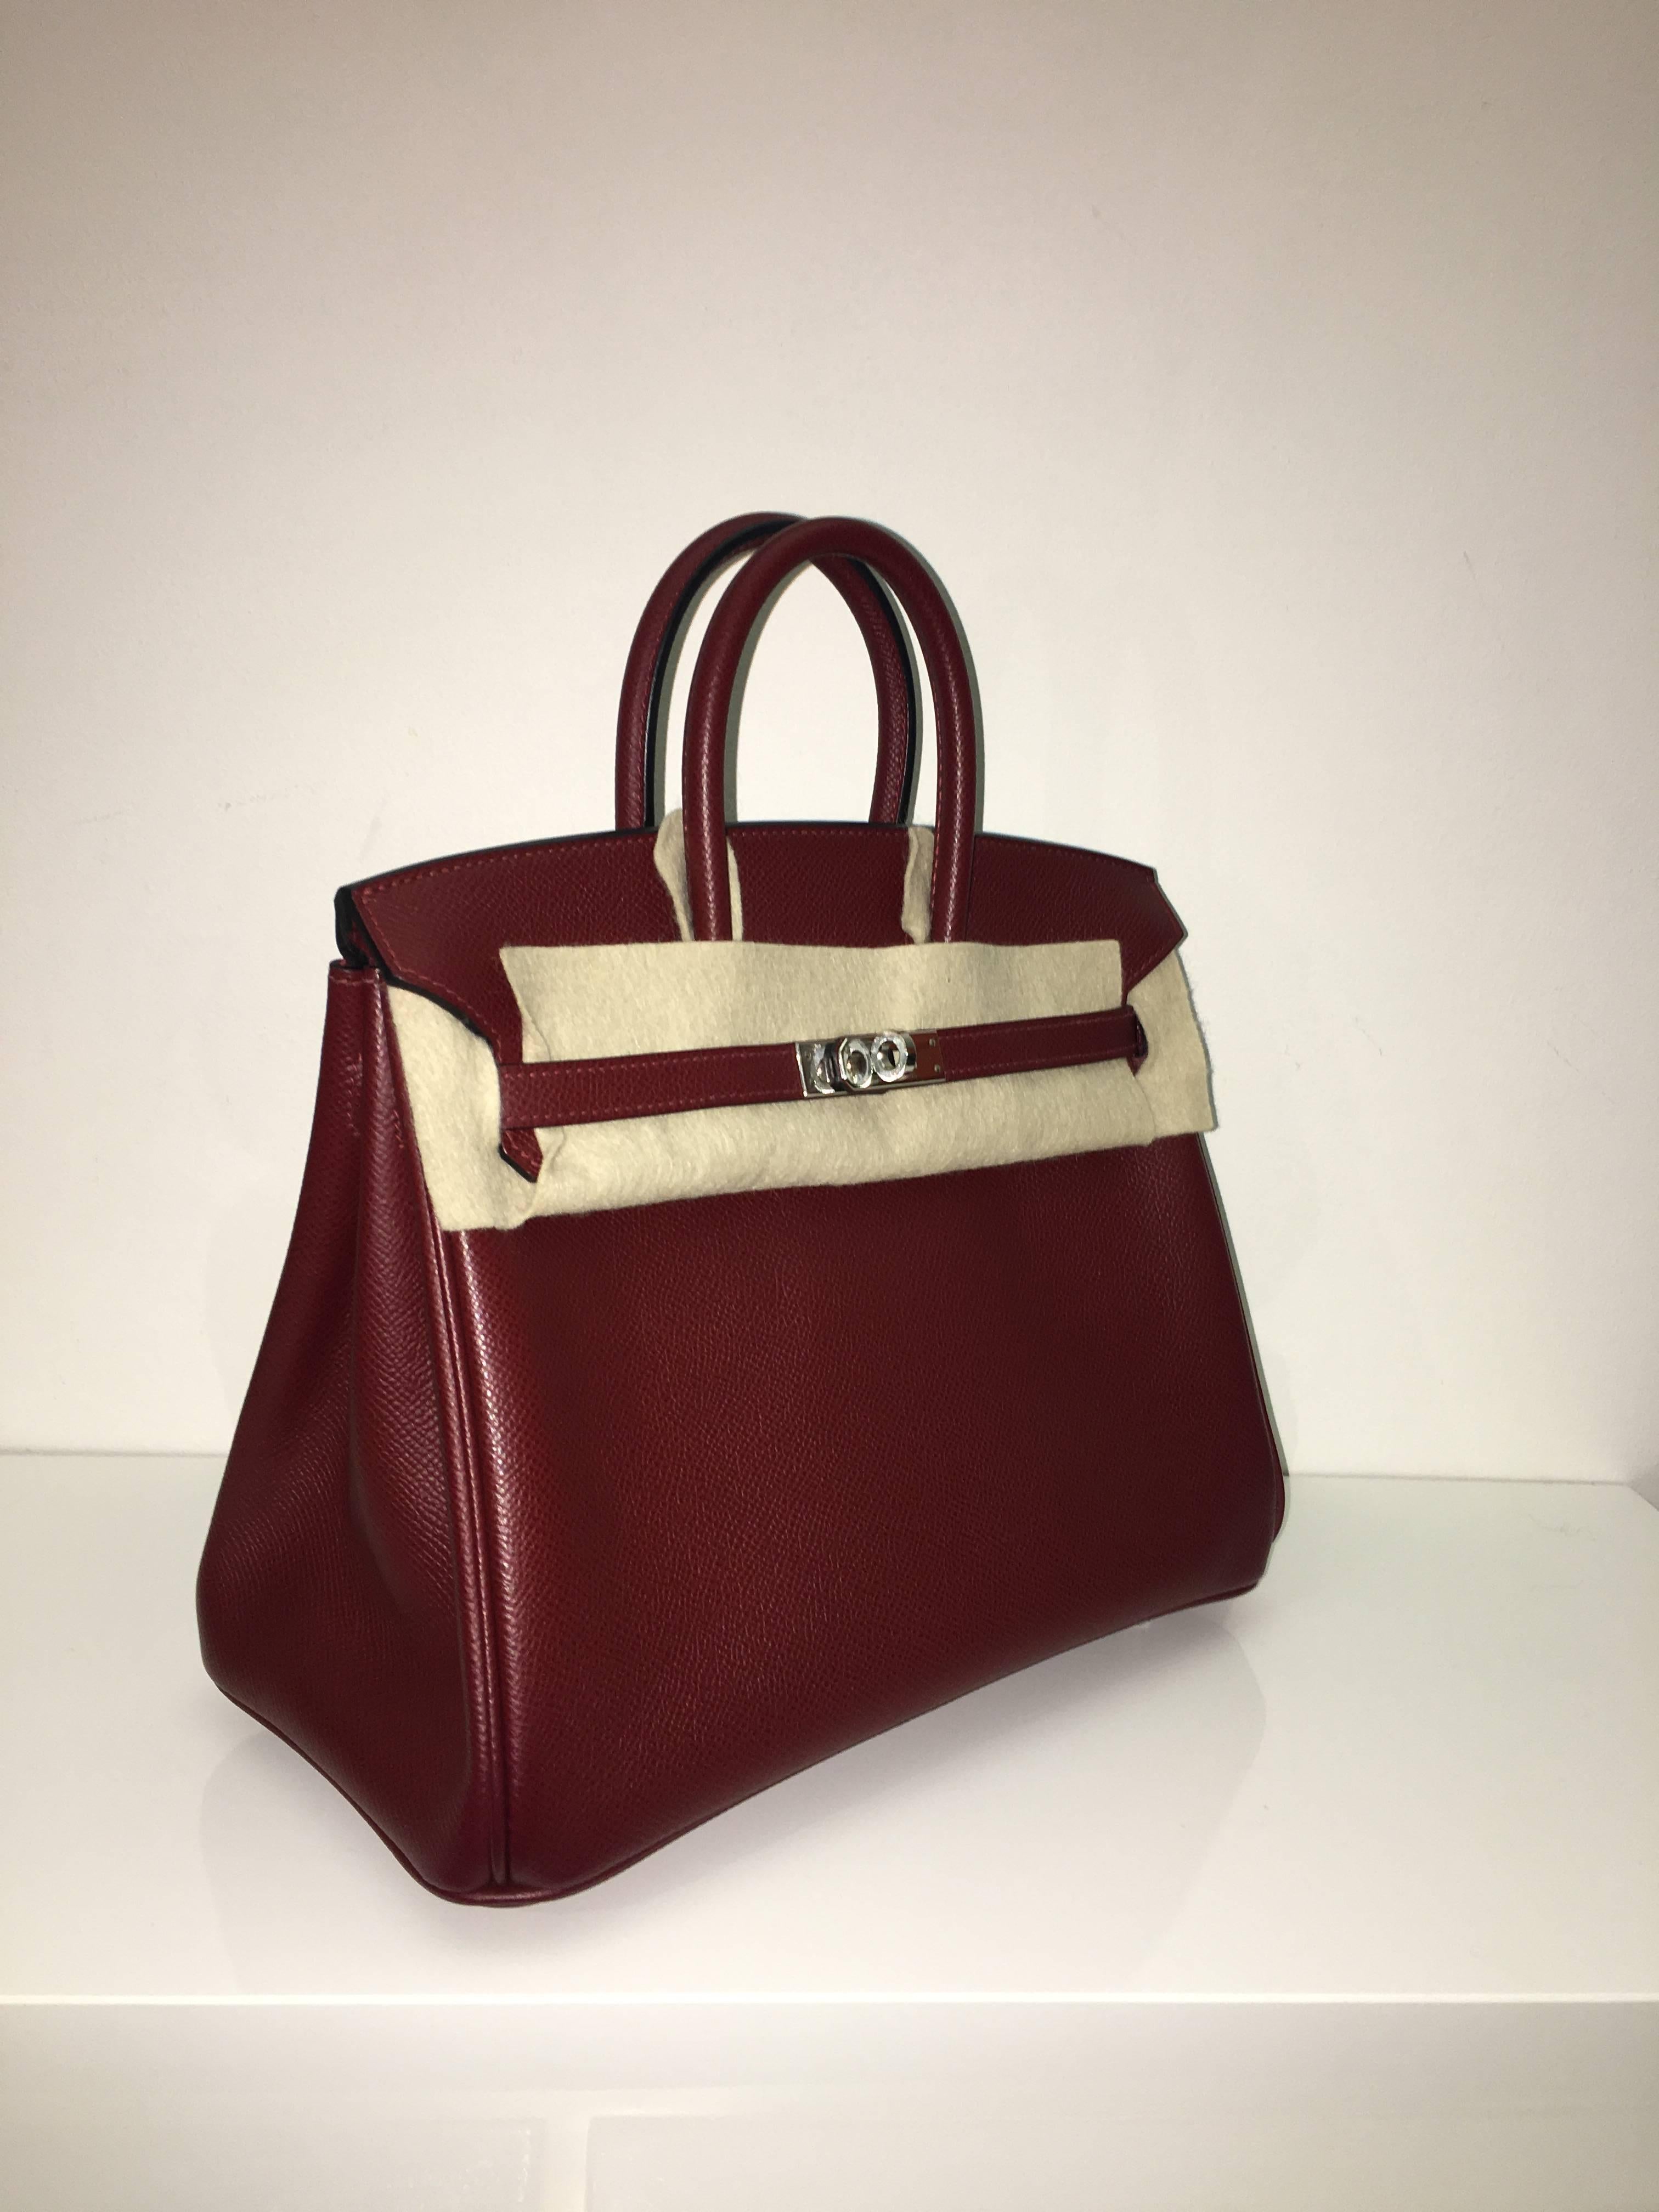 Hermes 
Birkin Size 25
Epsom Leather 
Colour Rouge H
Palladium (Silver) Hardware 
store fresh, comes with receipt and full set (dust bag, box...) 
Hydeparkfashion specializes in sourcing and delivering authentic luxury handbags, mainly Hermes,